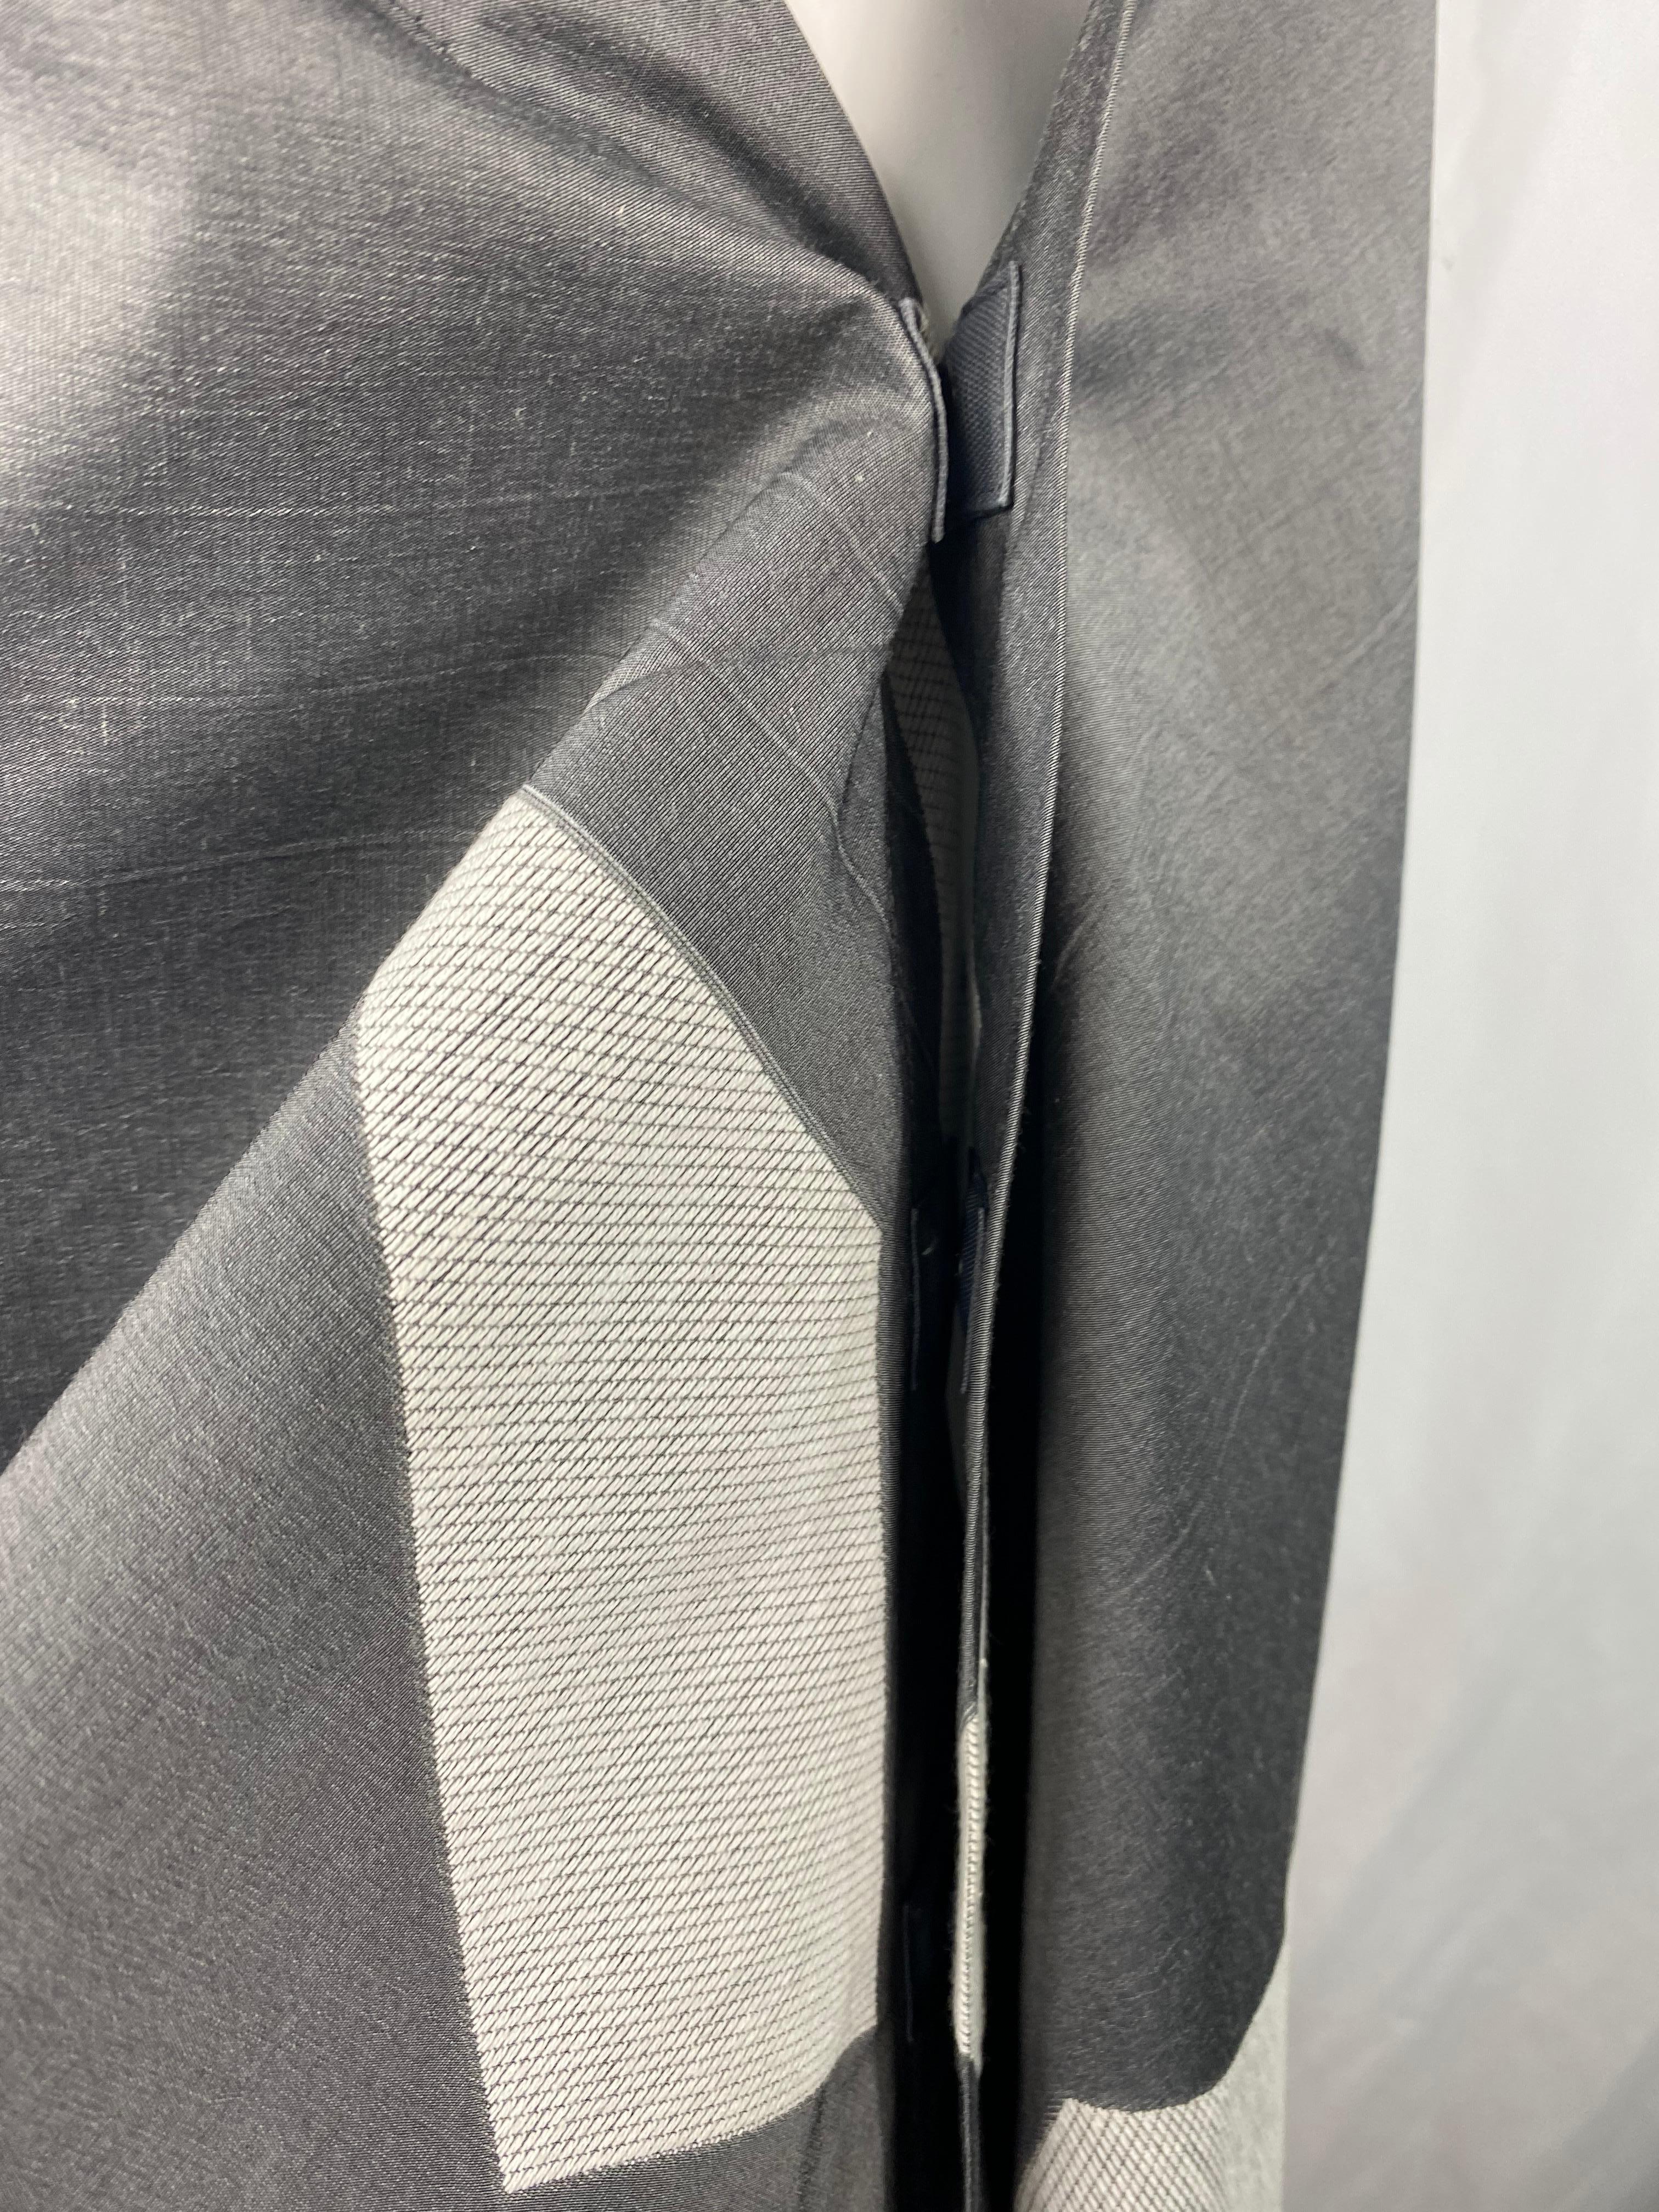 Issey Miyake Grey Cotton Sleeveless Asymmetrical Midi Dress, Size 3 In Excellent Condition For Sale In Beverly Hills, CA